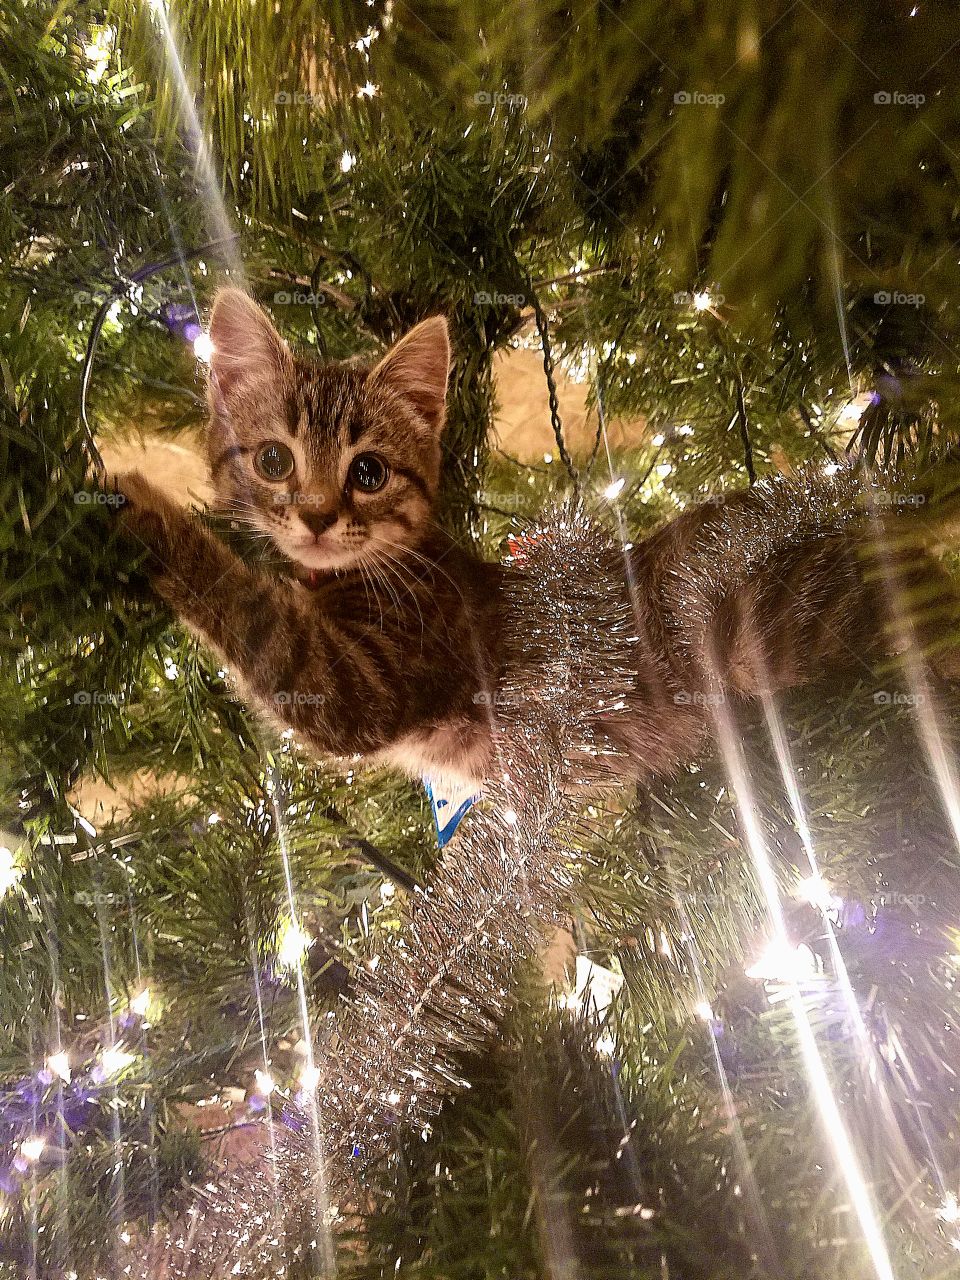 helping with decorations